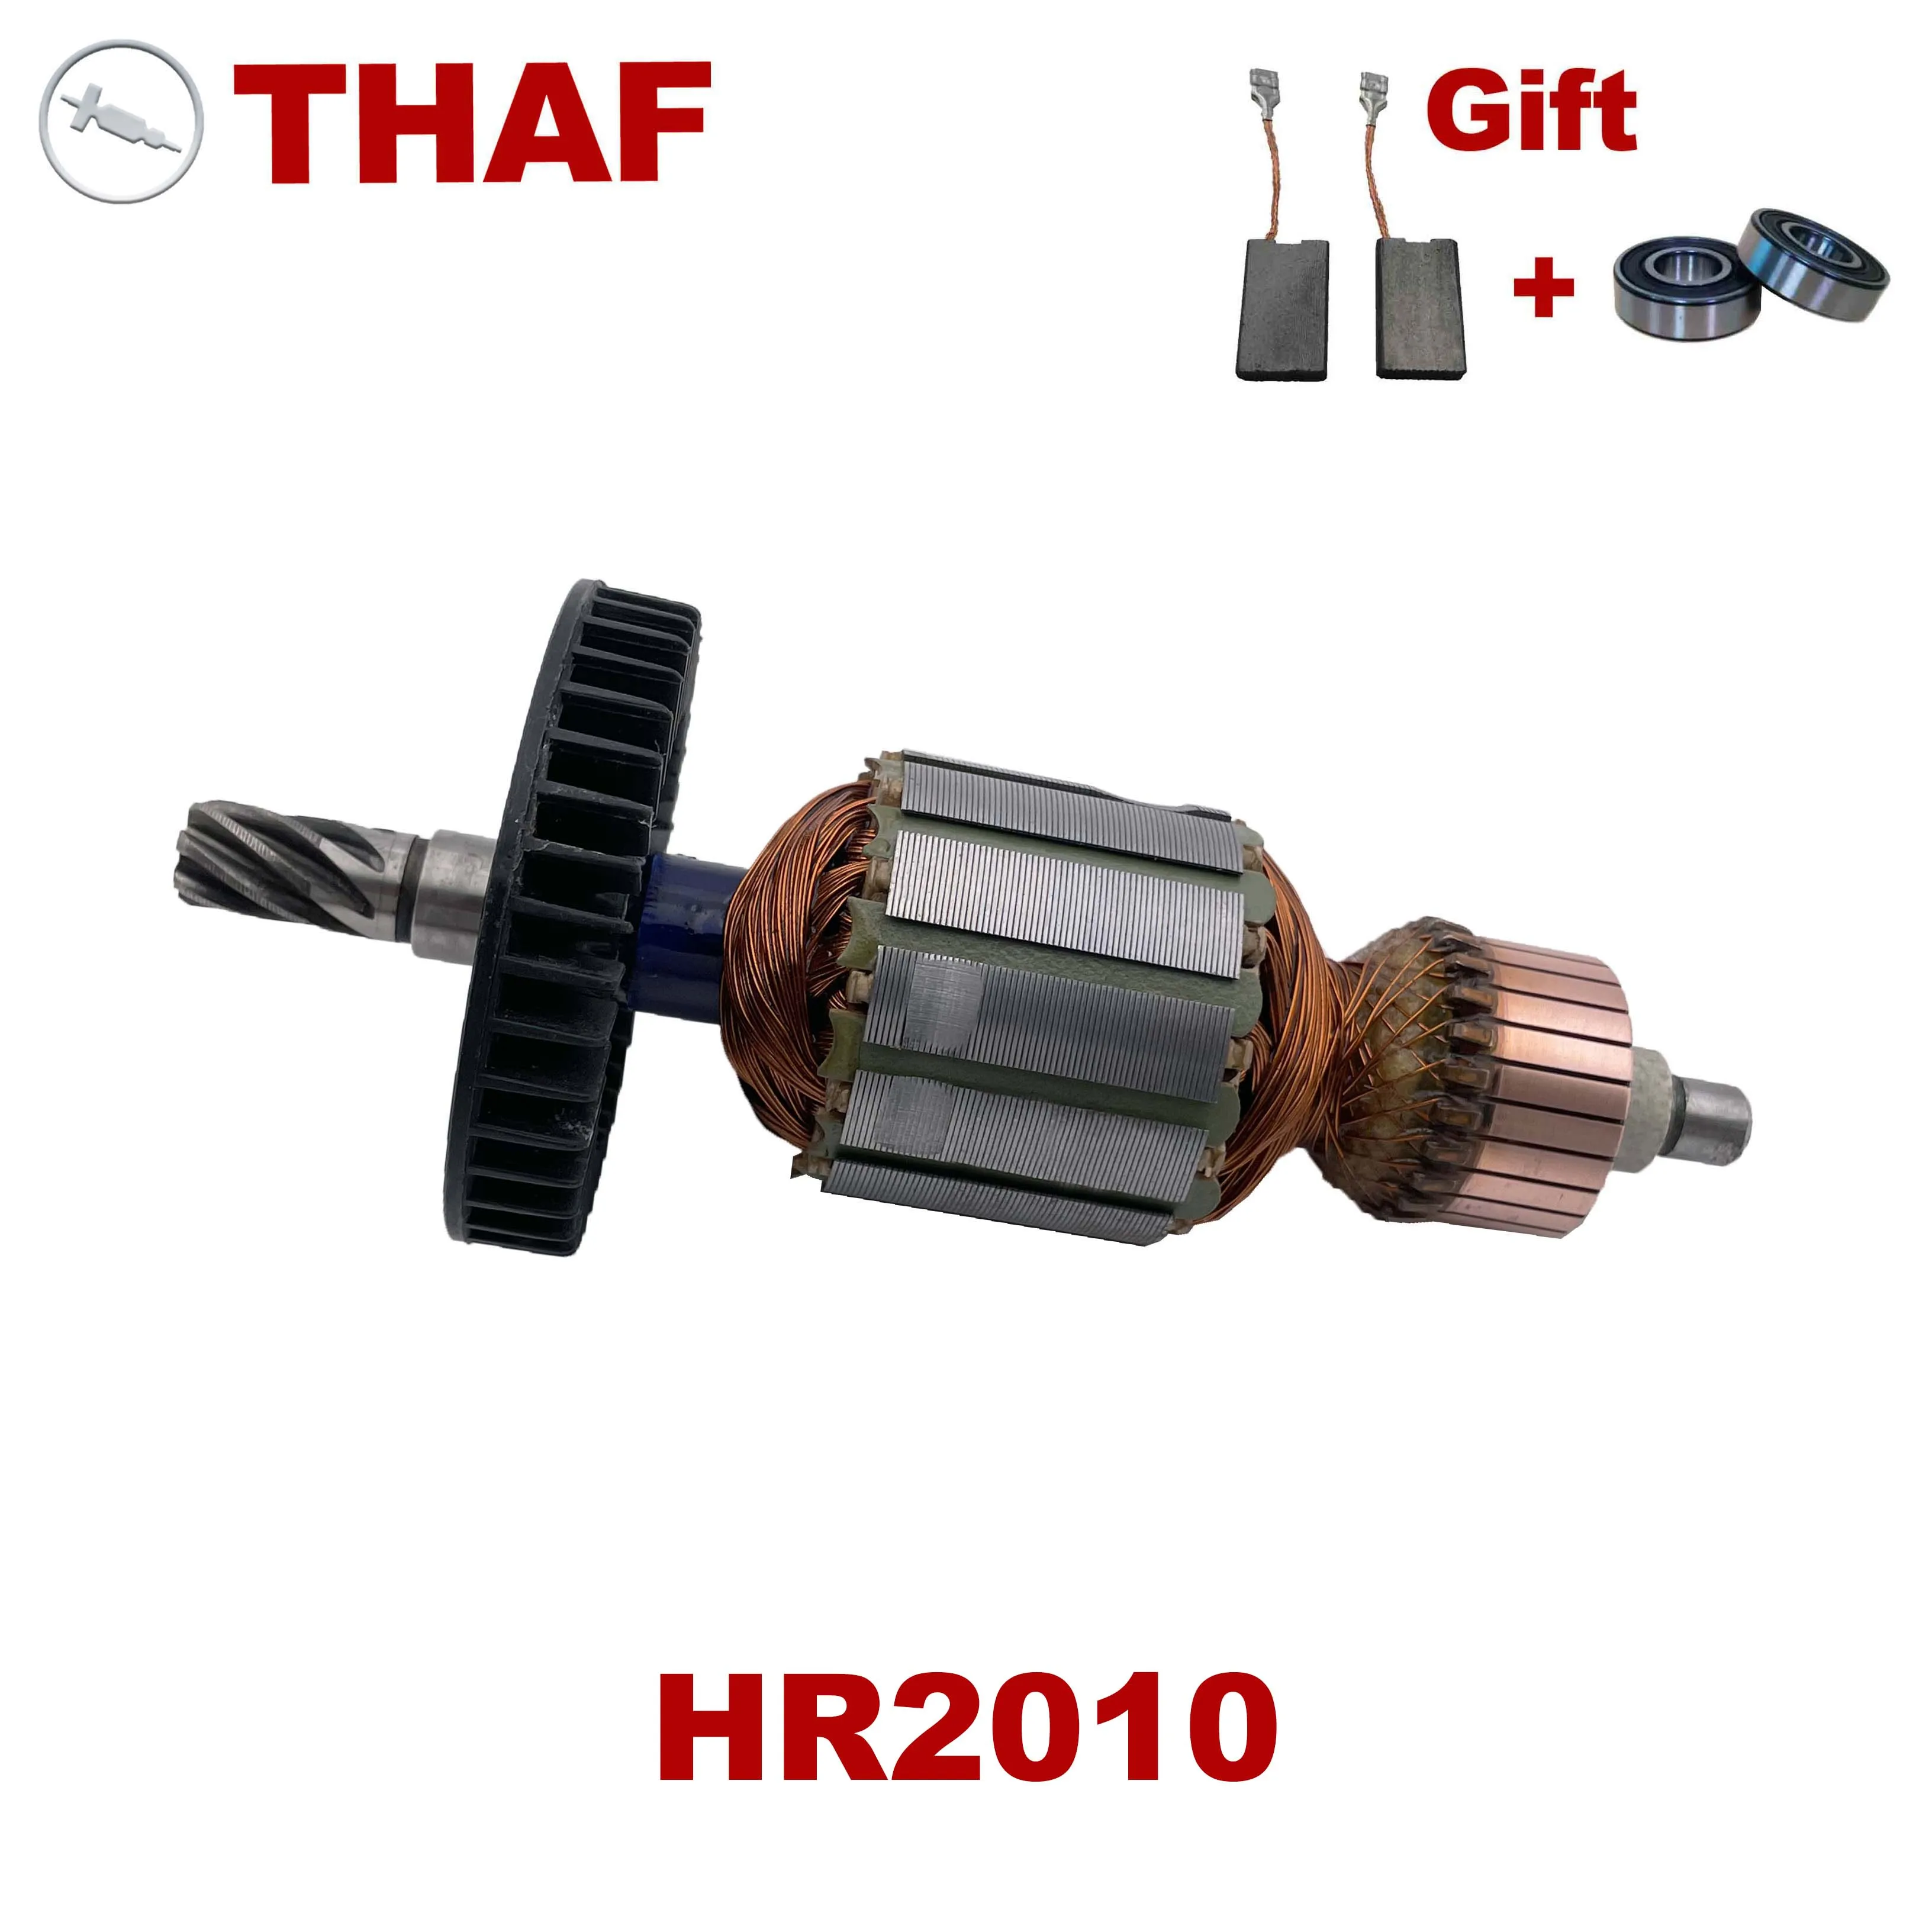 AC220V-240V Armature Rotor Anchor Stator Replacement for Makita Rotary Hammer HR2010 |